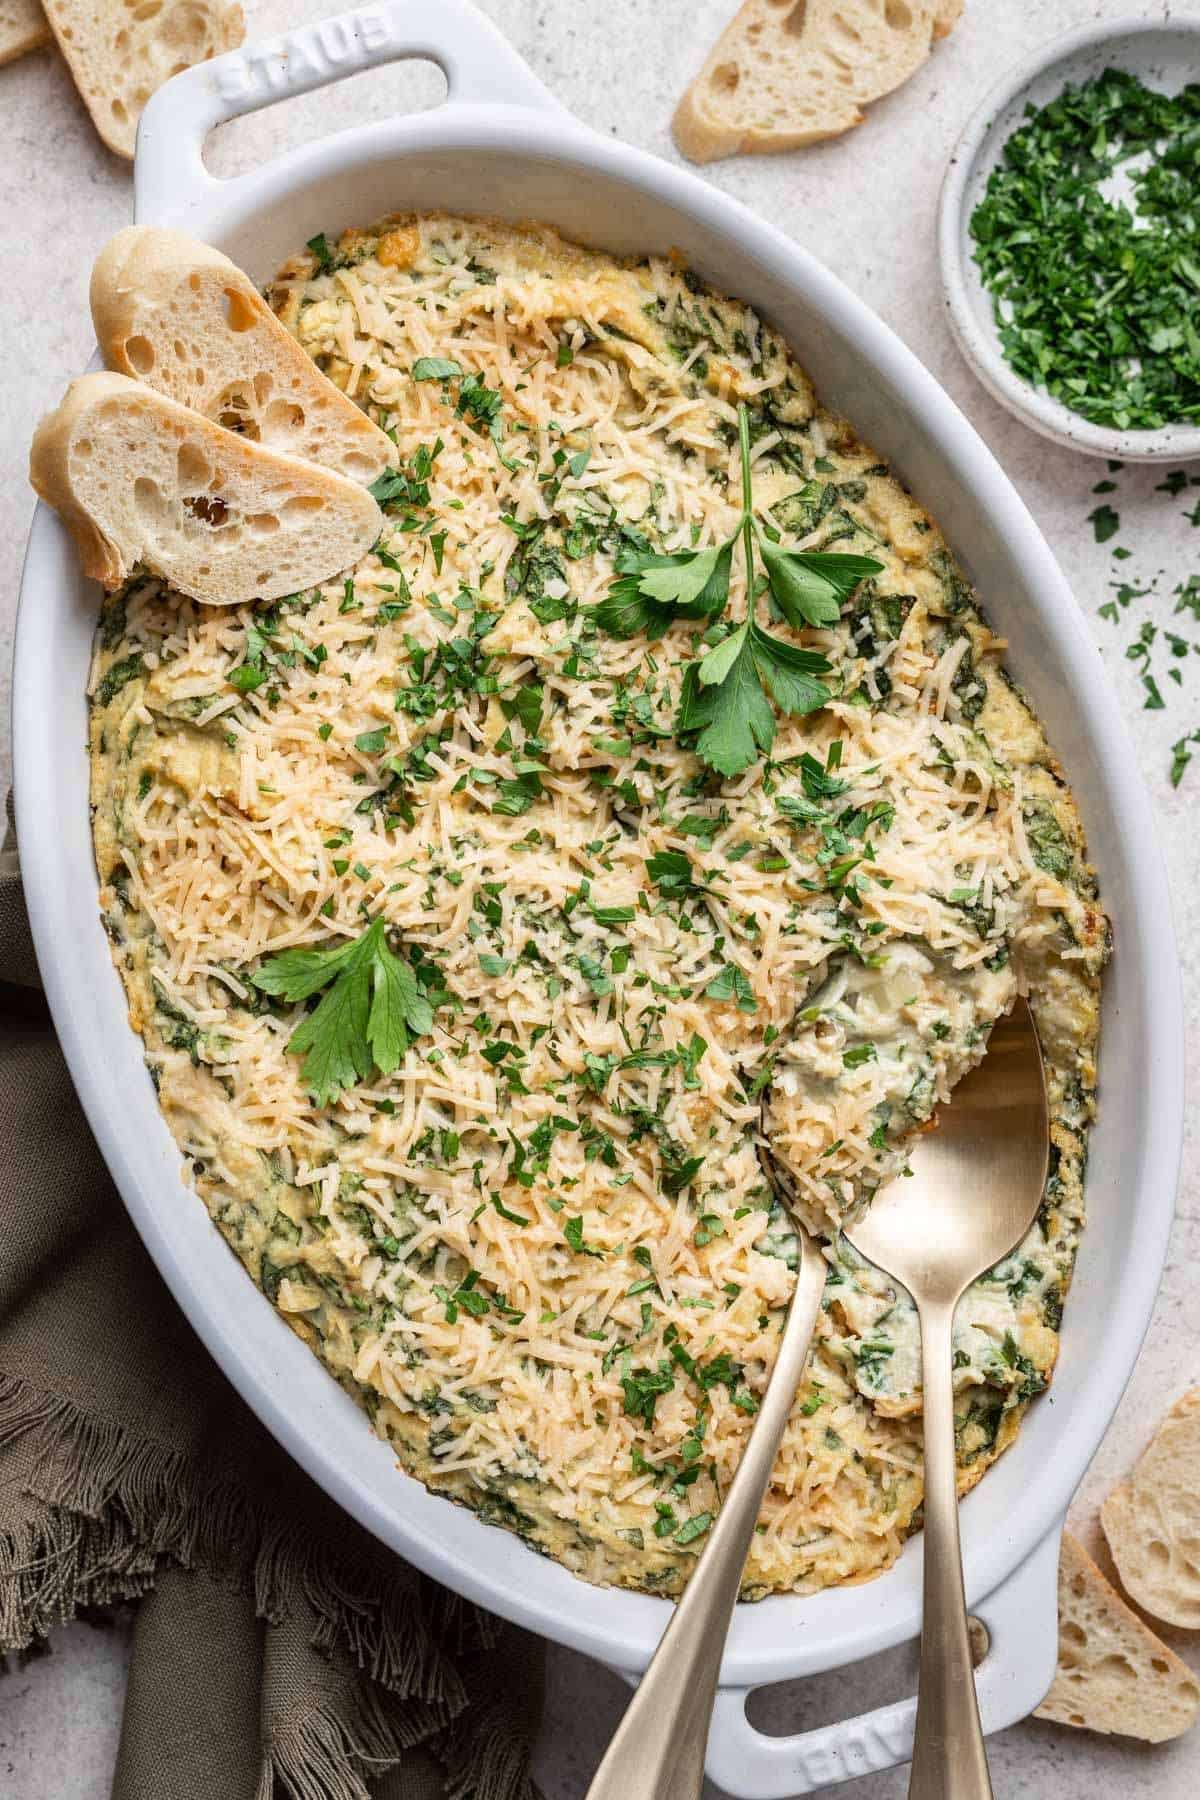 Final spinach artichoke dip garnished with fresh herbs and sliced bread for serving.